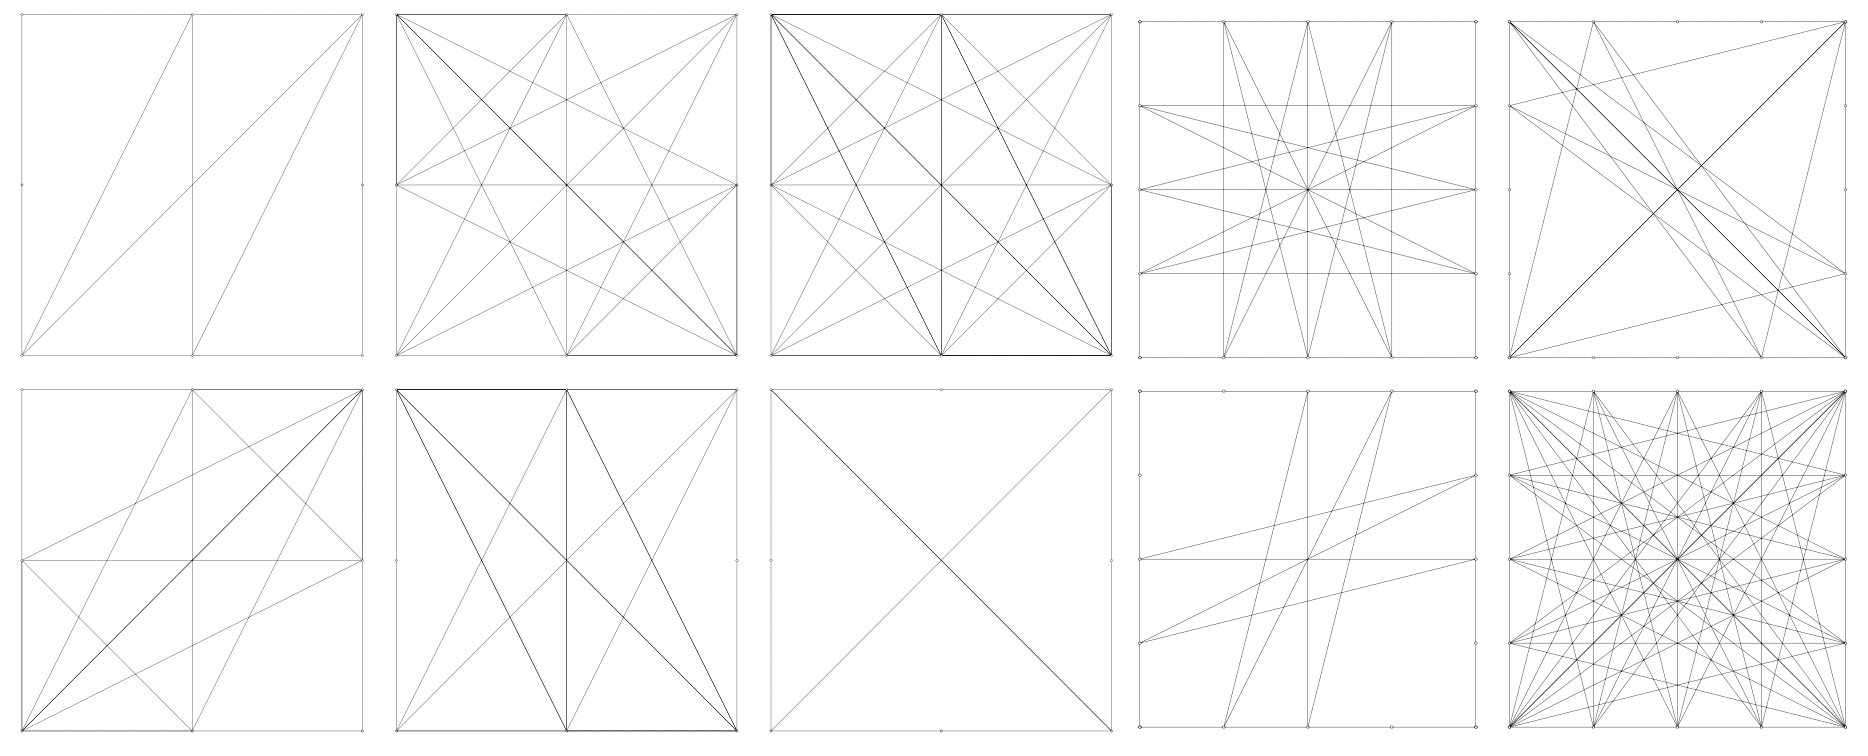 Basic geometries: some of the results of experiments with a 3 × 3 and a 5 × 5 grid